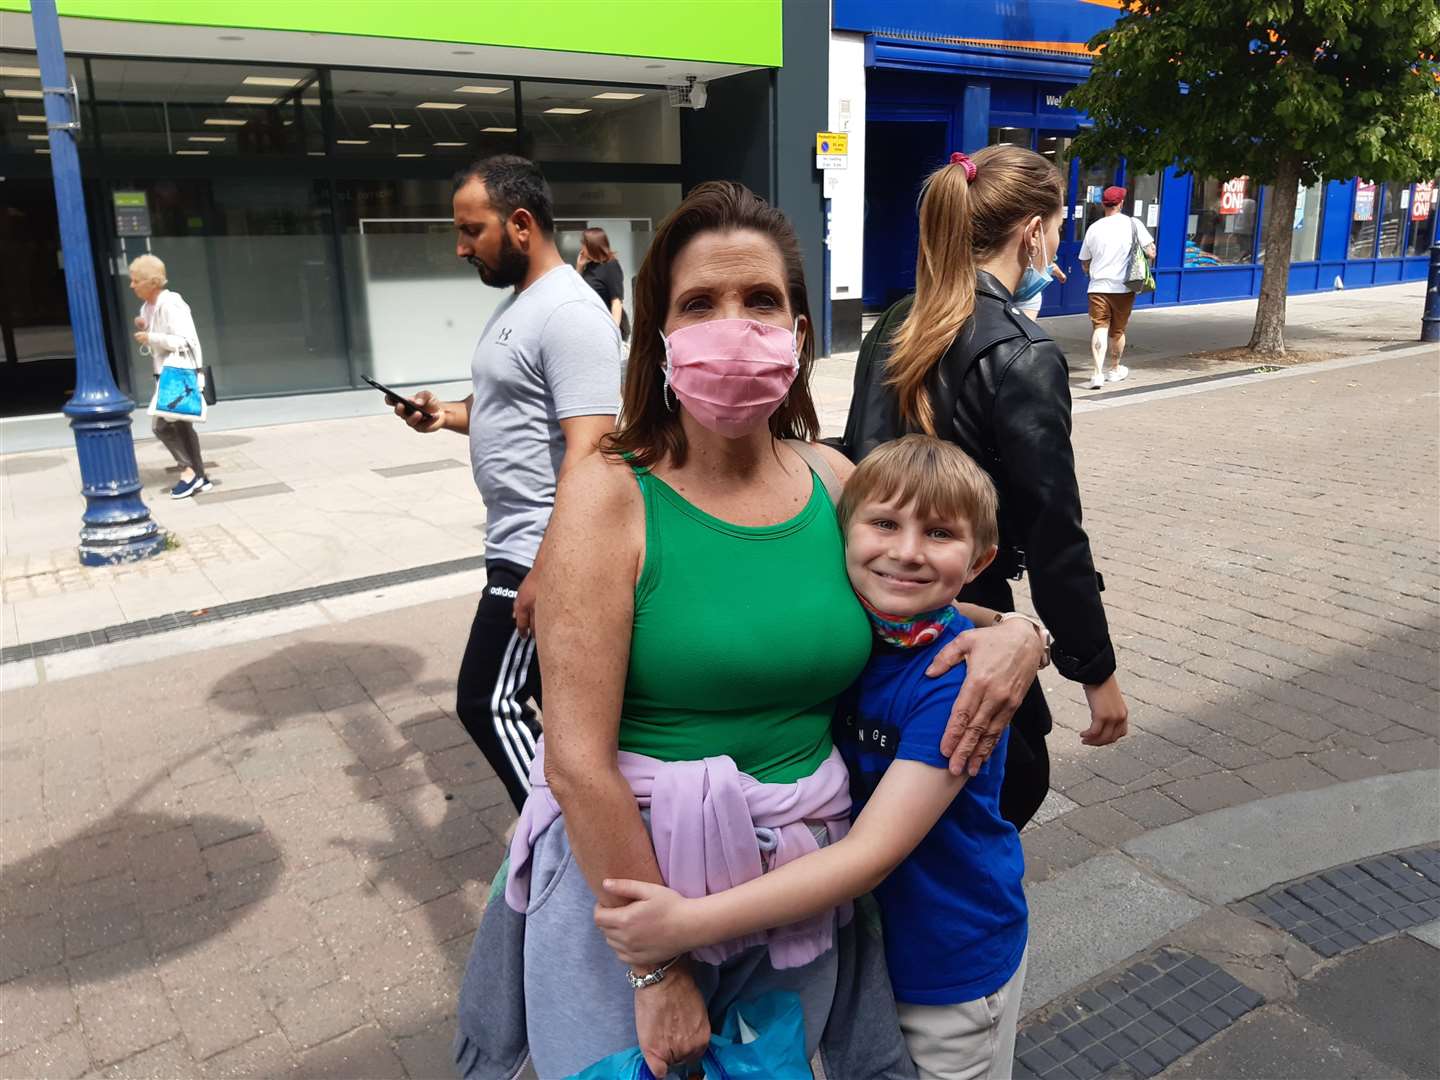 Alison Head, 48 and her son Cody, nine, visited Thamesgate Shopping Centre in Gravesend